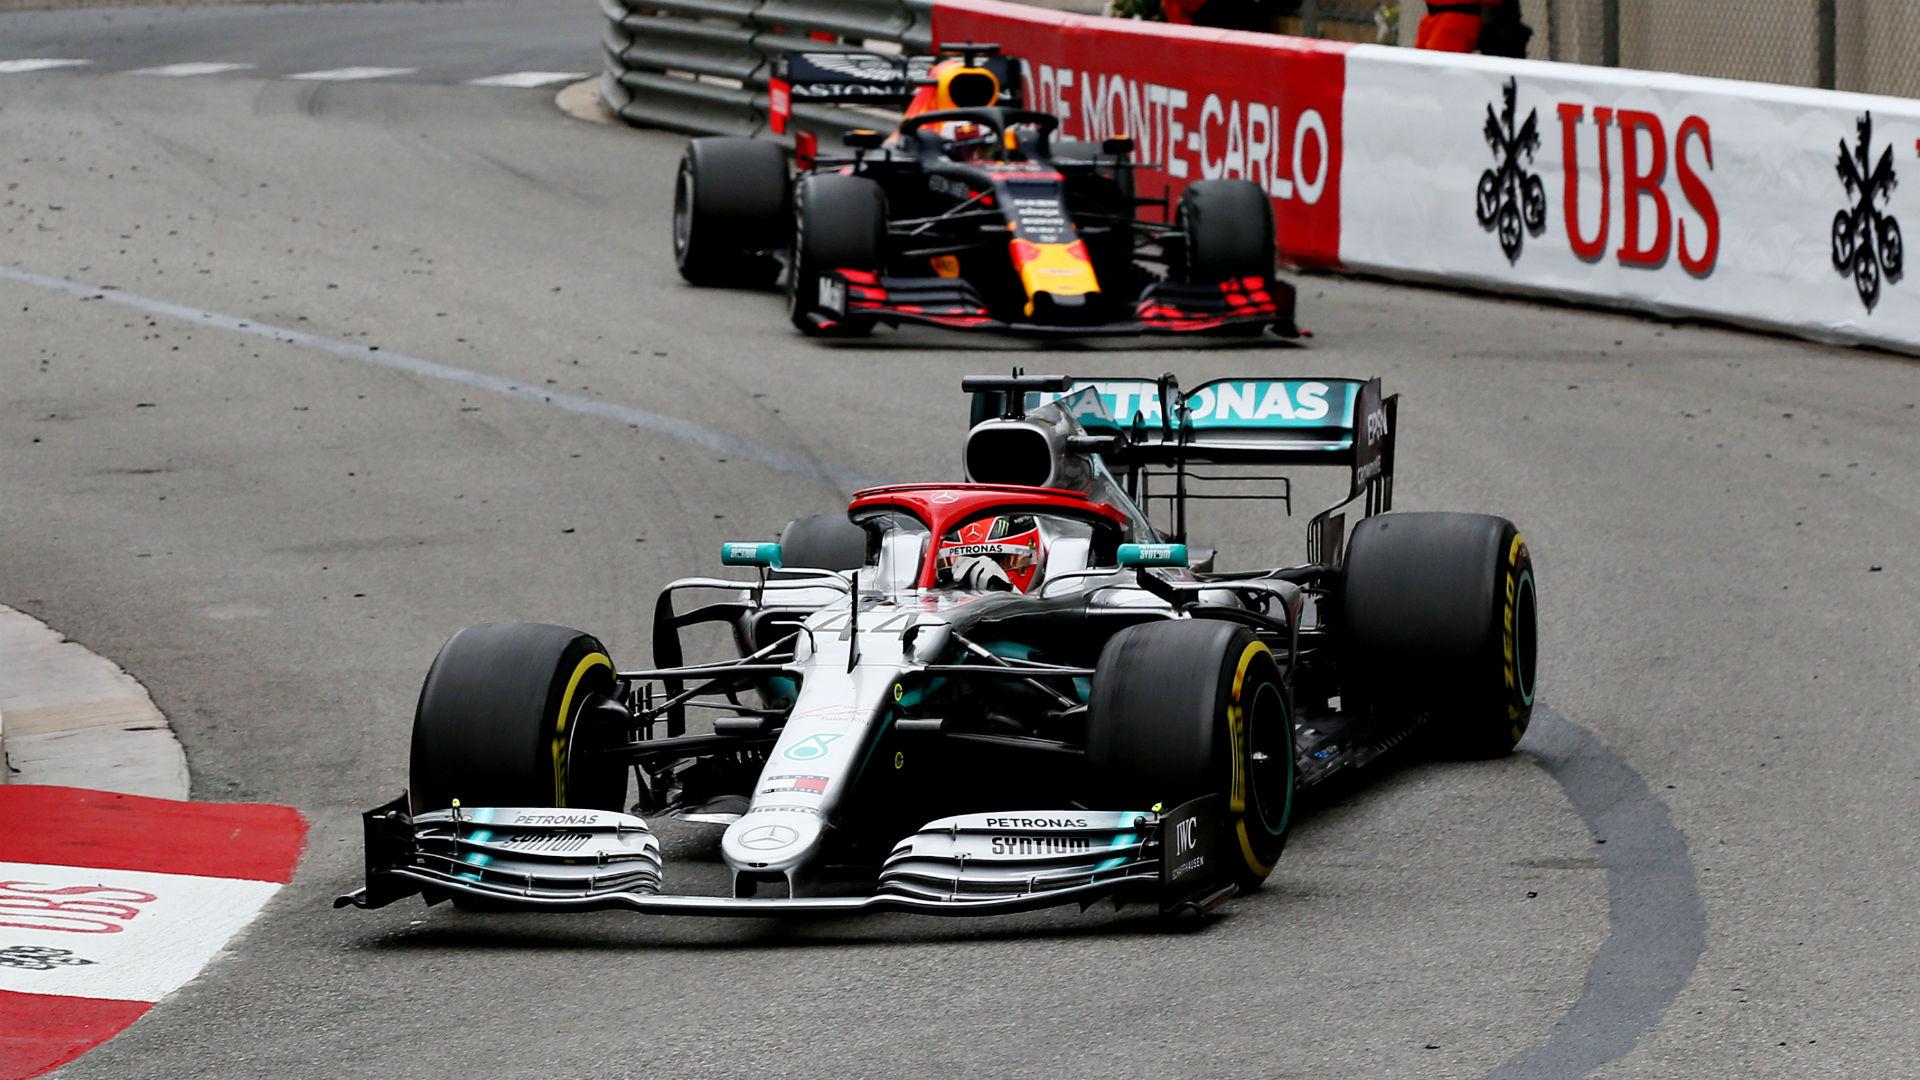 Hamilton Clings On For Monaco Glory But Mercedes' One Two Run Ends